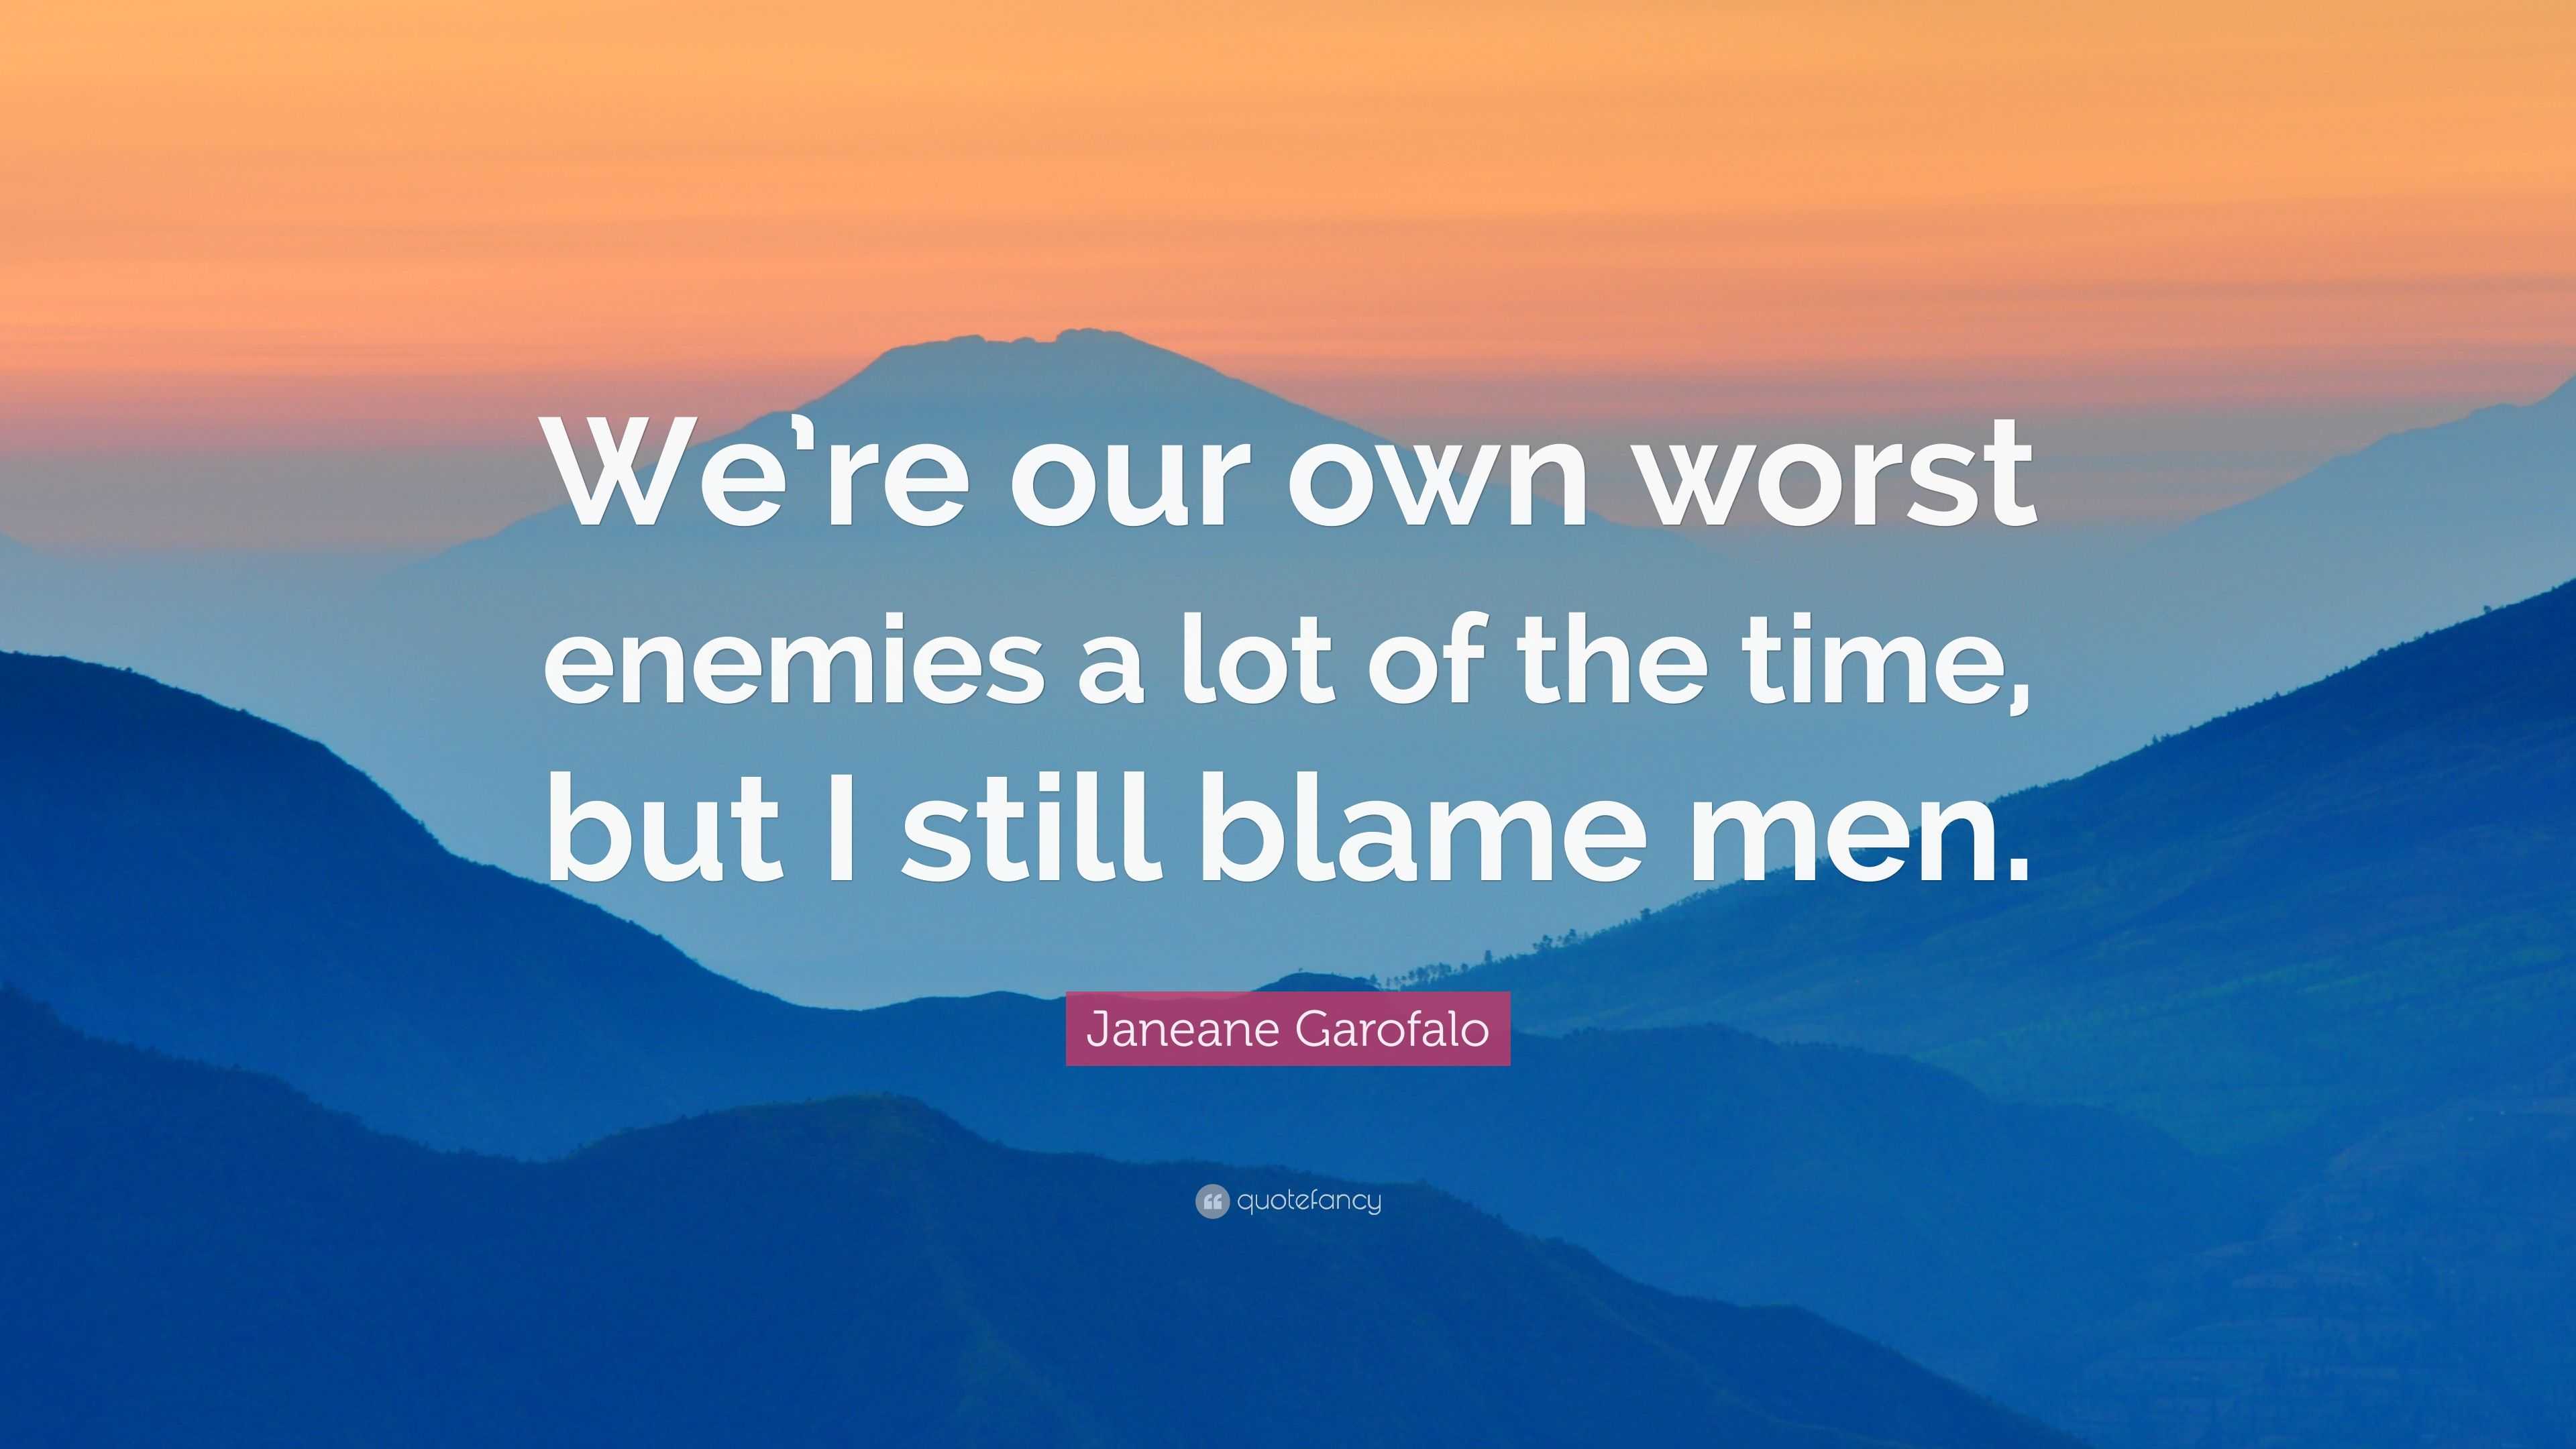 Janeane Garofalo Quote: "We're our own worst enemies a lot of the time, but I still blame men ...